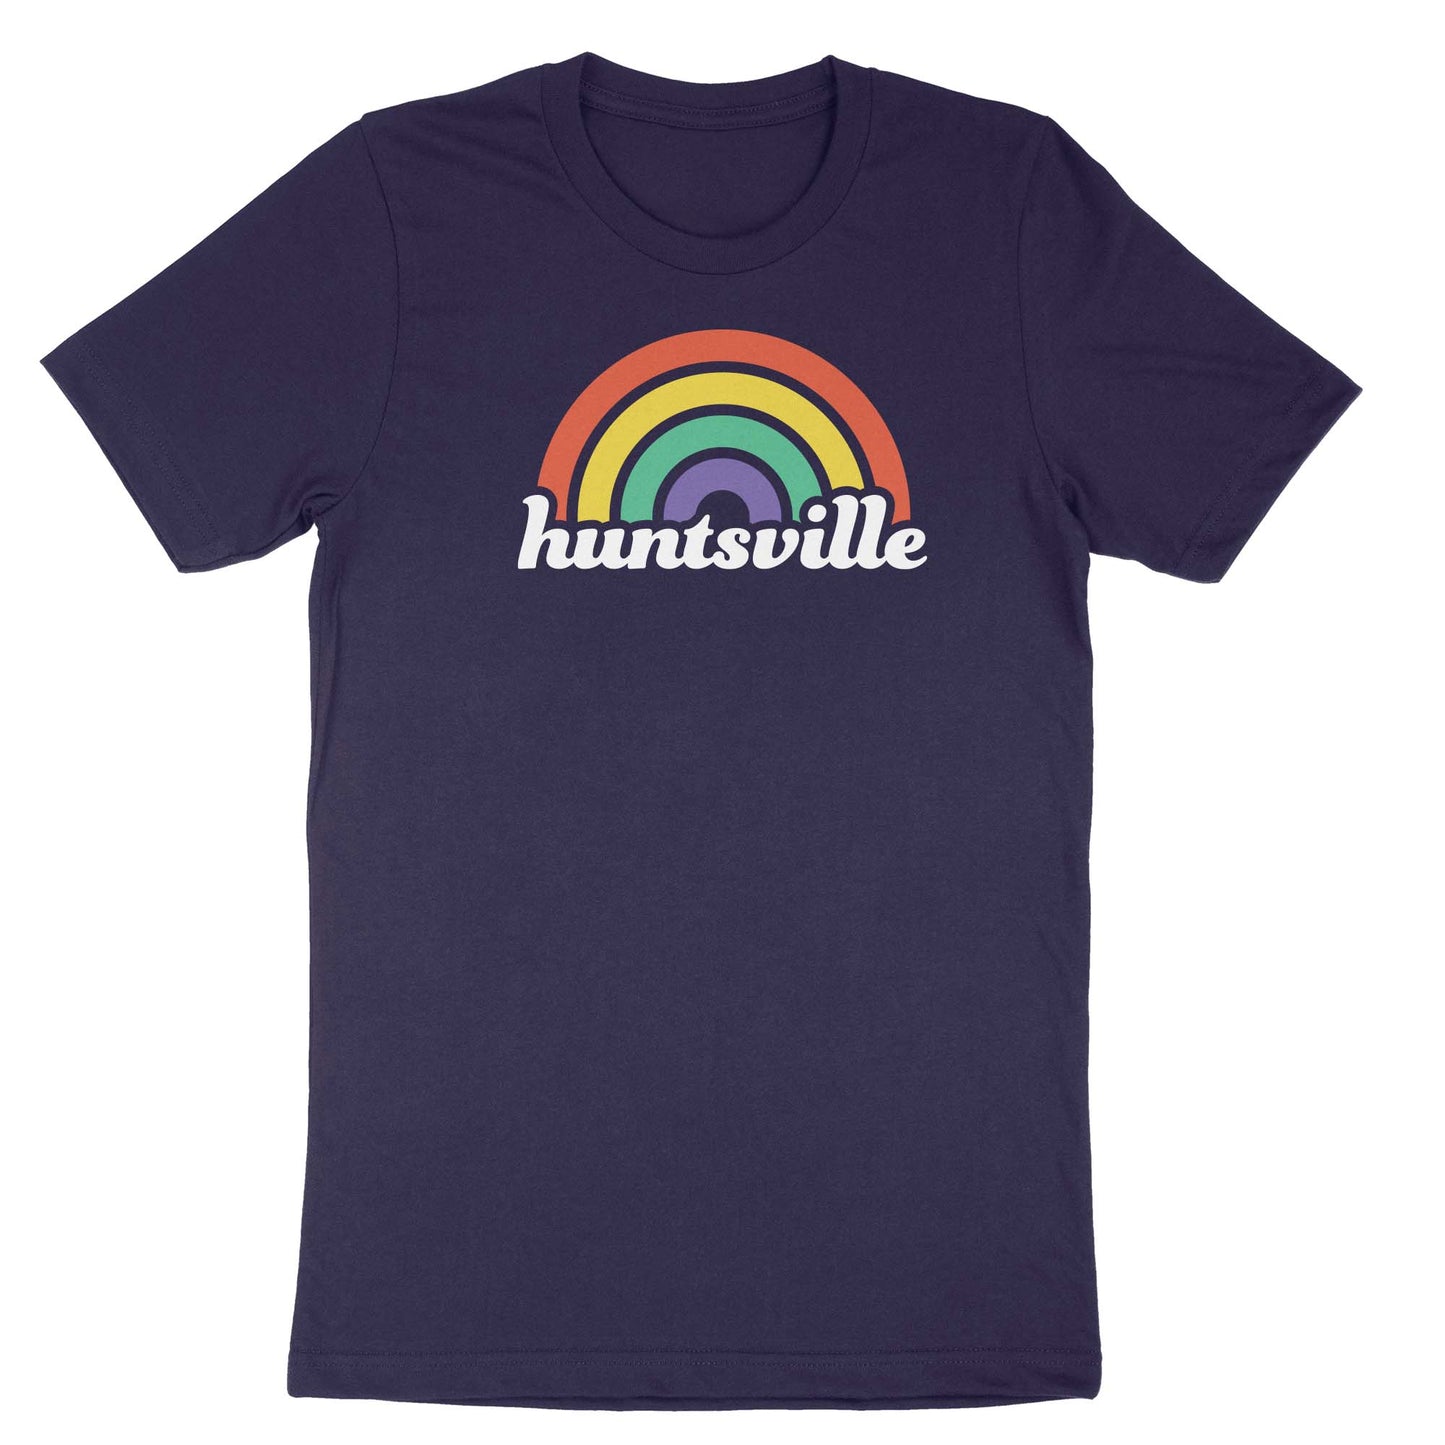 Dark blue T-Shirt of the text "huntsville" with a rainbow over it